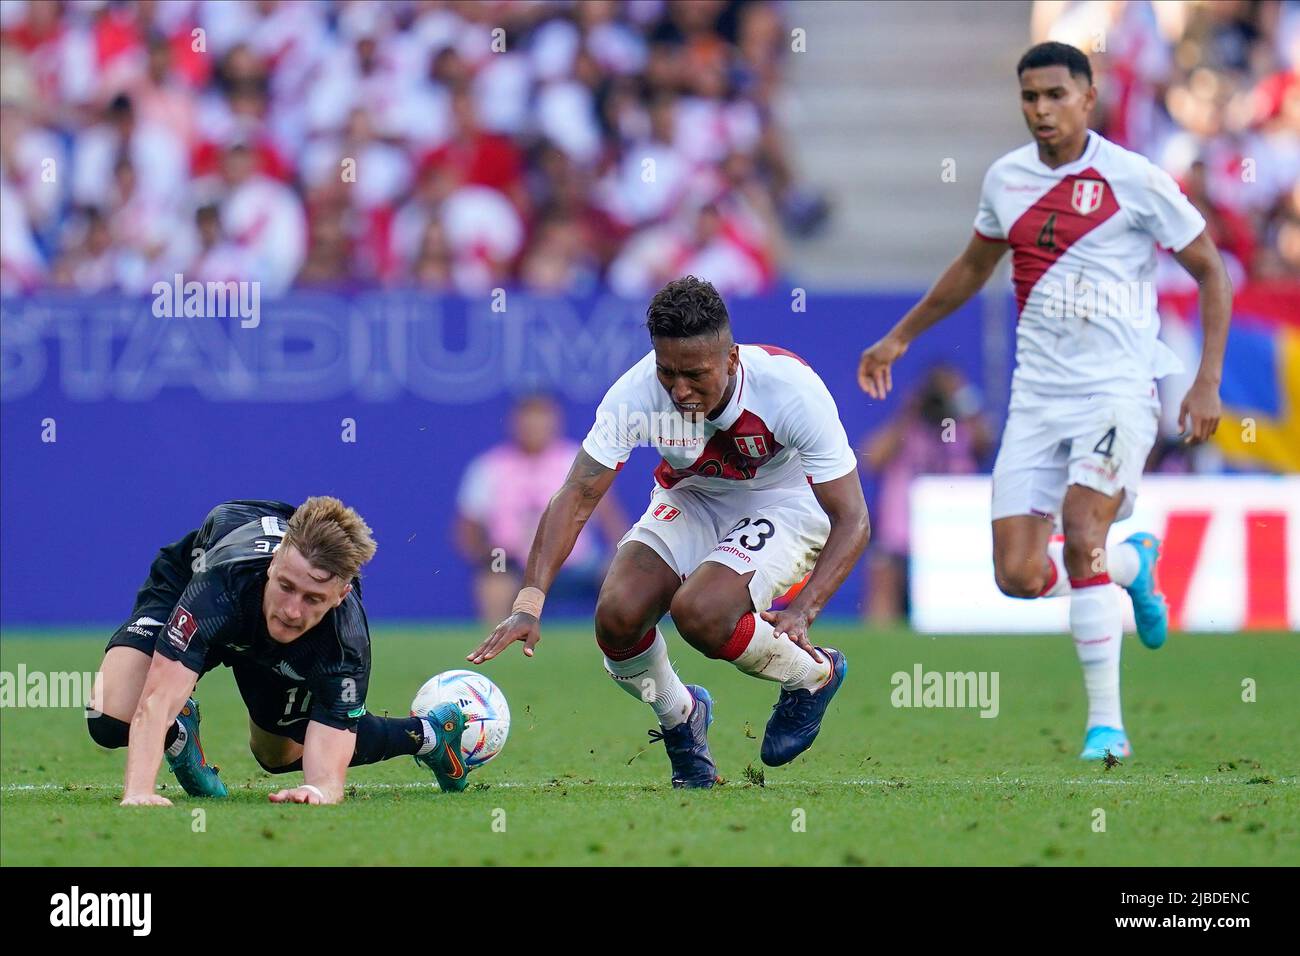 Barcelona, Spain. June 5, 2022, Alex Greive of New Zealand and Santiago Ormeno of Peru during the friendly match between Peru and New Zealand played at RCDE Stadium on June 5, 2022 in Barcelona, Spain. (Photo by Bagu Blanco / PRESSINPHOTO) Stock Photo